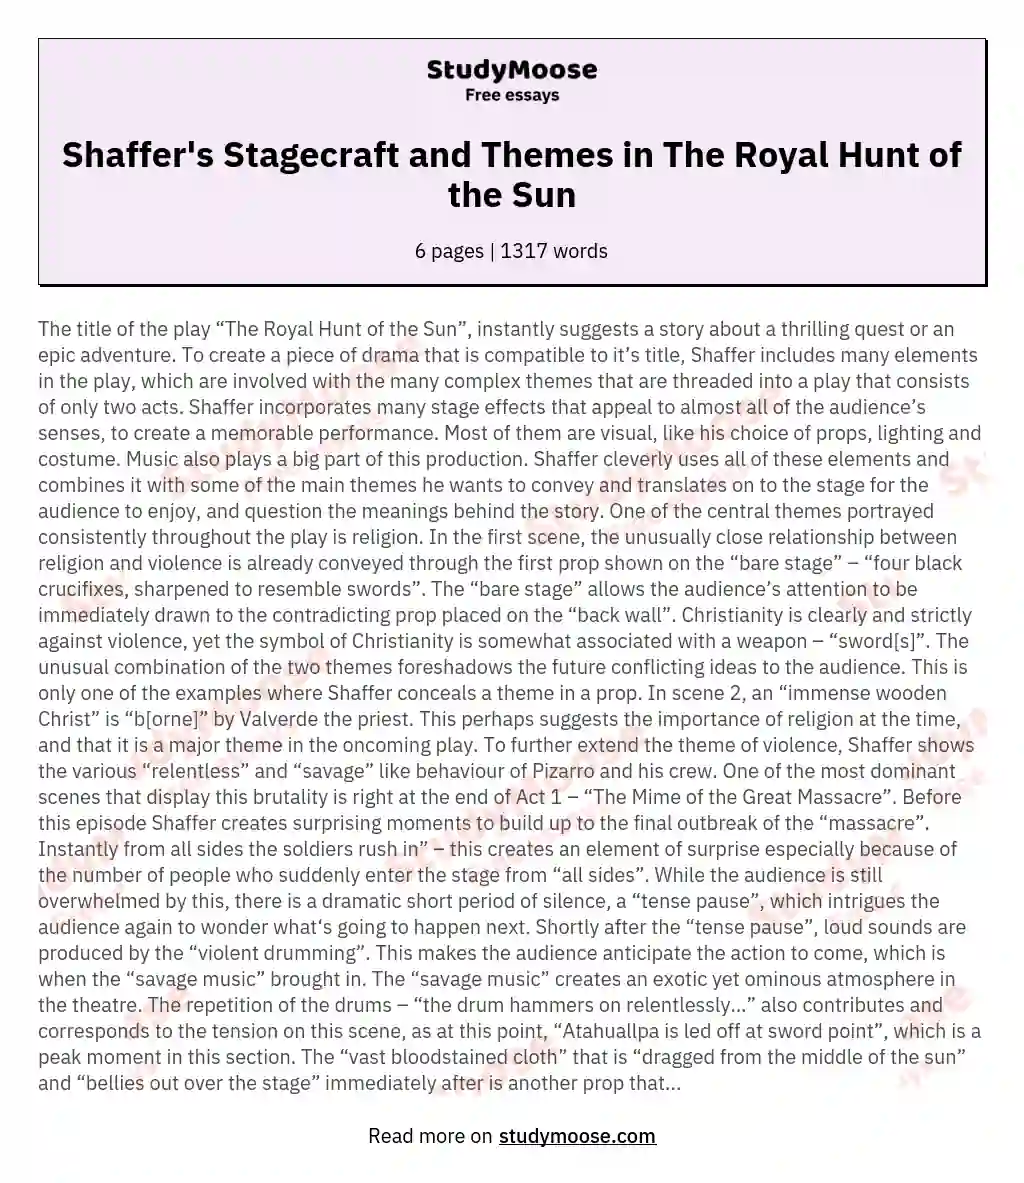 Shaffer's Stagecraft and Themes in The Royal Hunt of the Sun